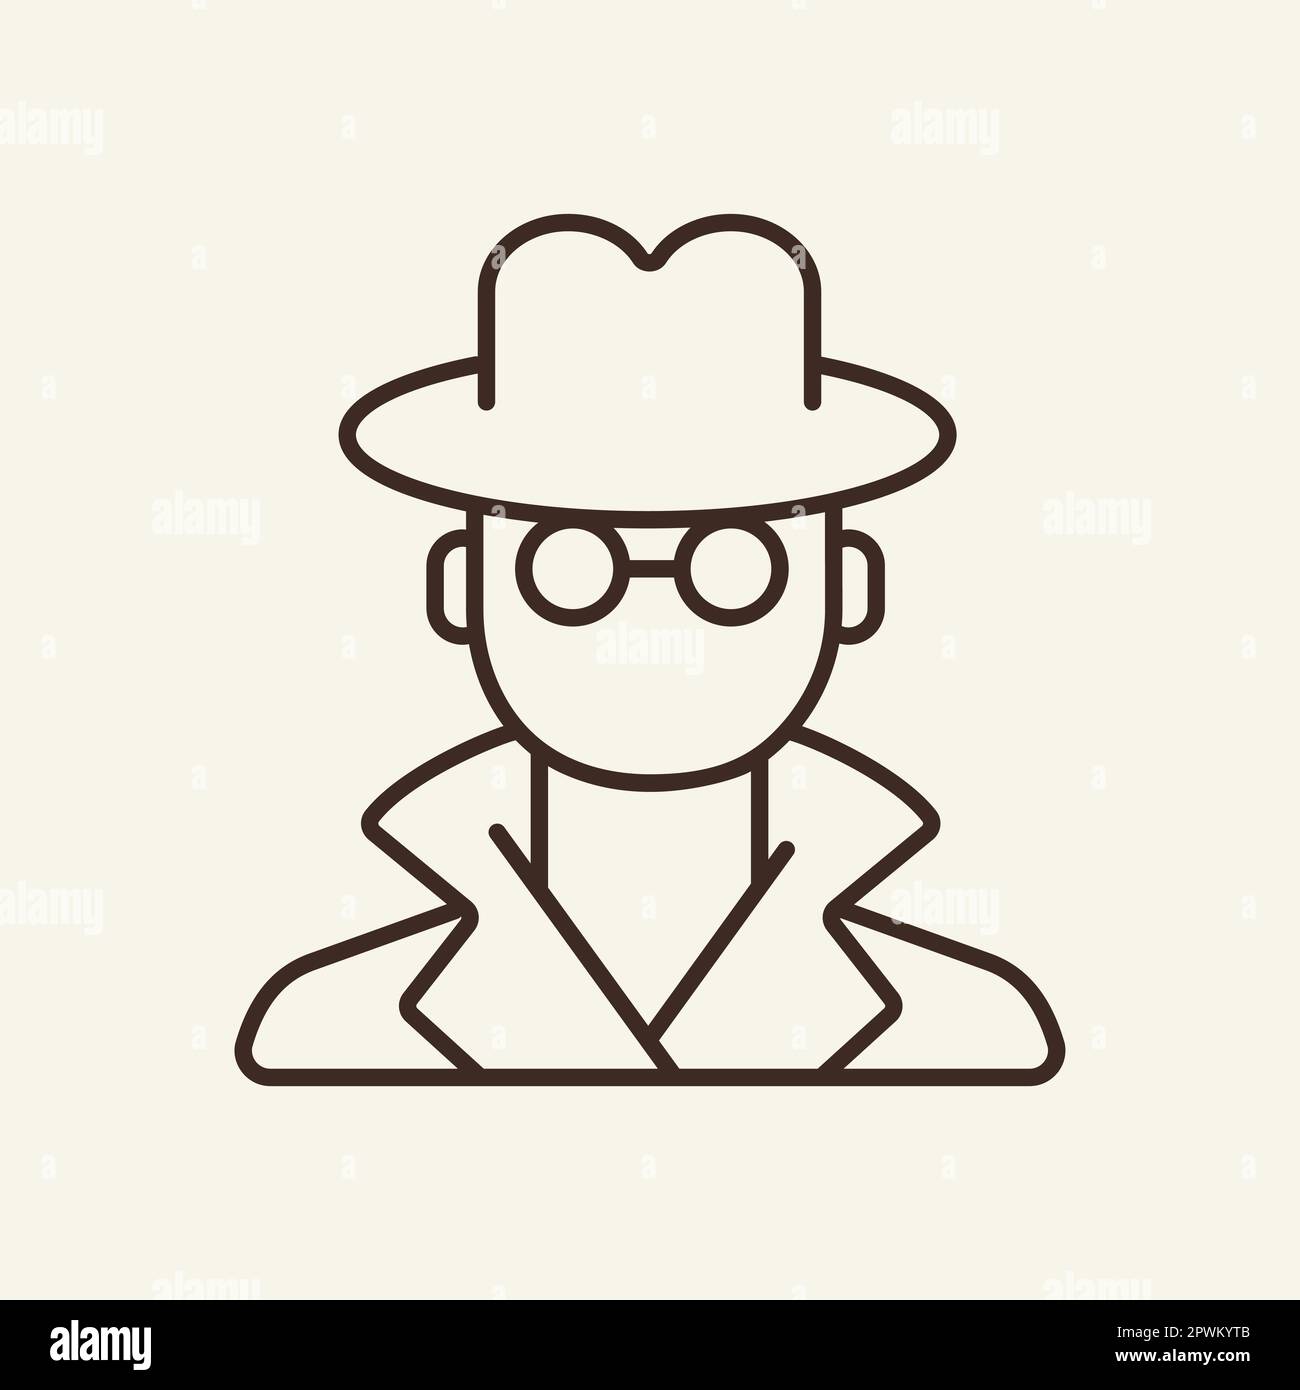 Man wearing hat and glasses line icon Stock Vector